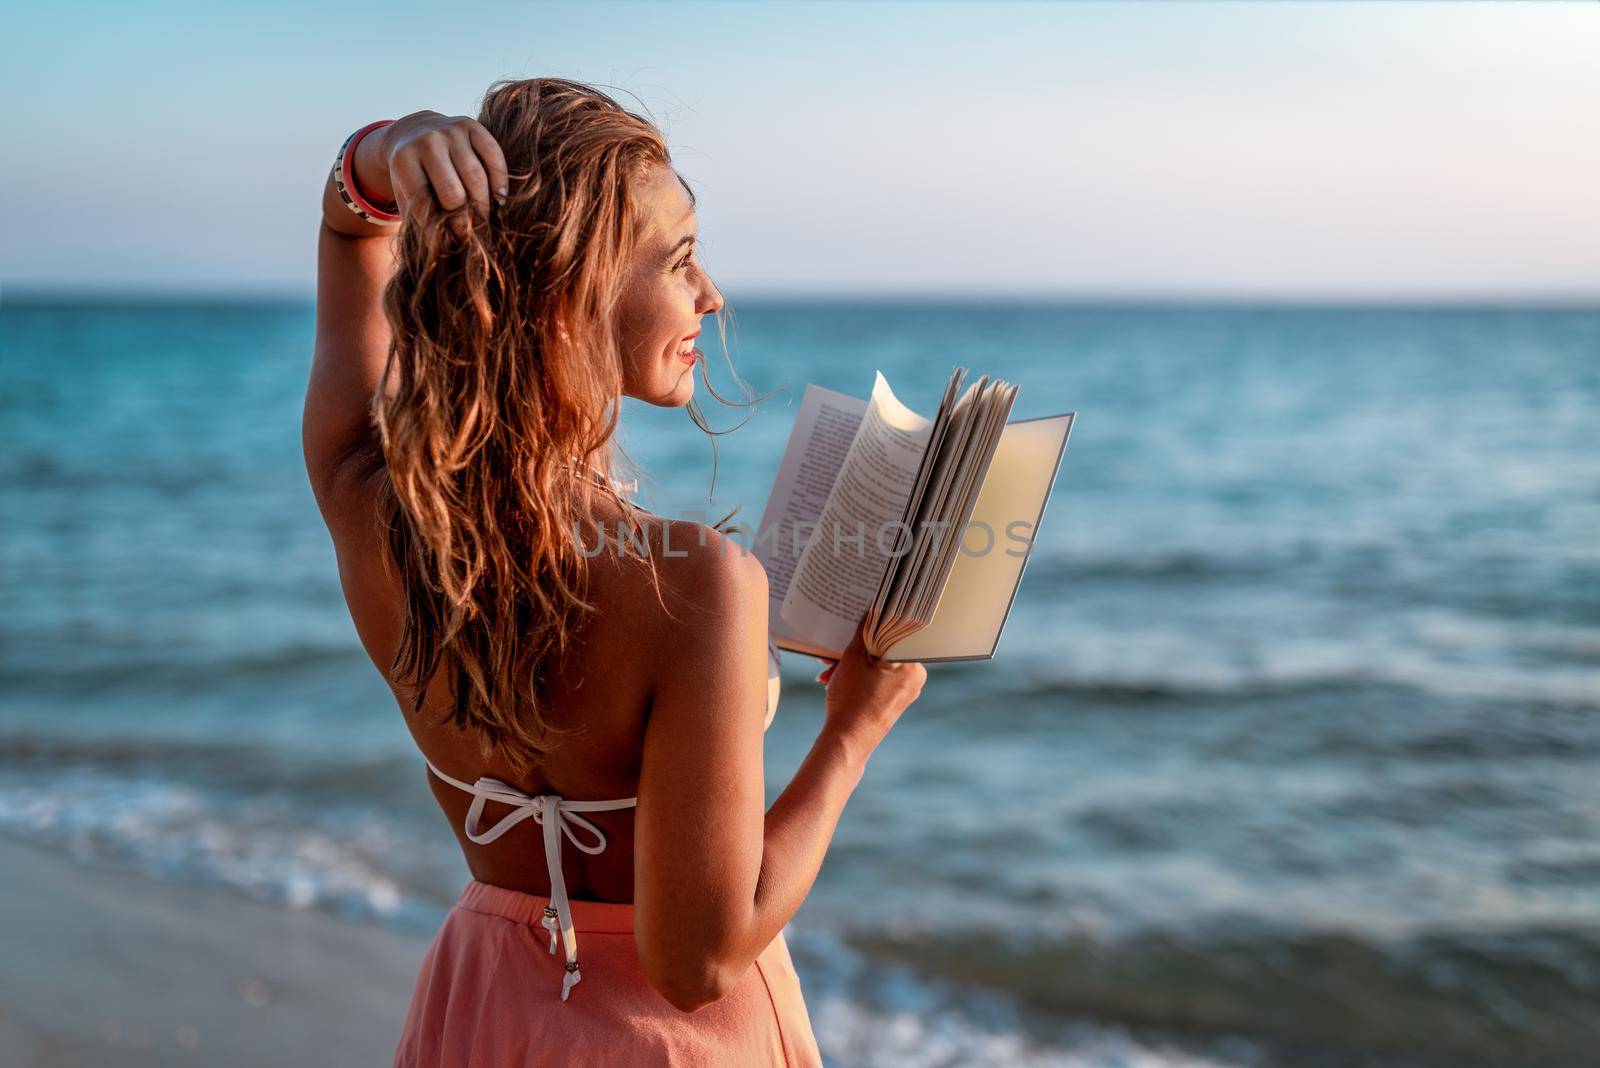 Young woman holding a book on the beach. She is standing next to the water and looking away with smile on her satisfied face.